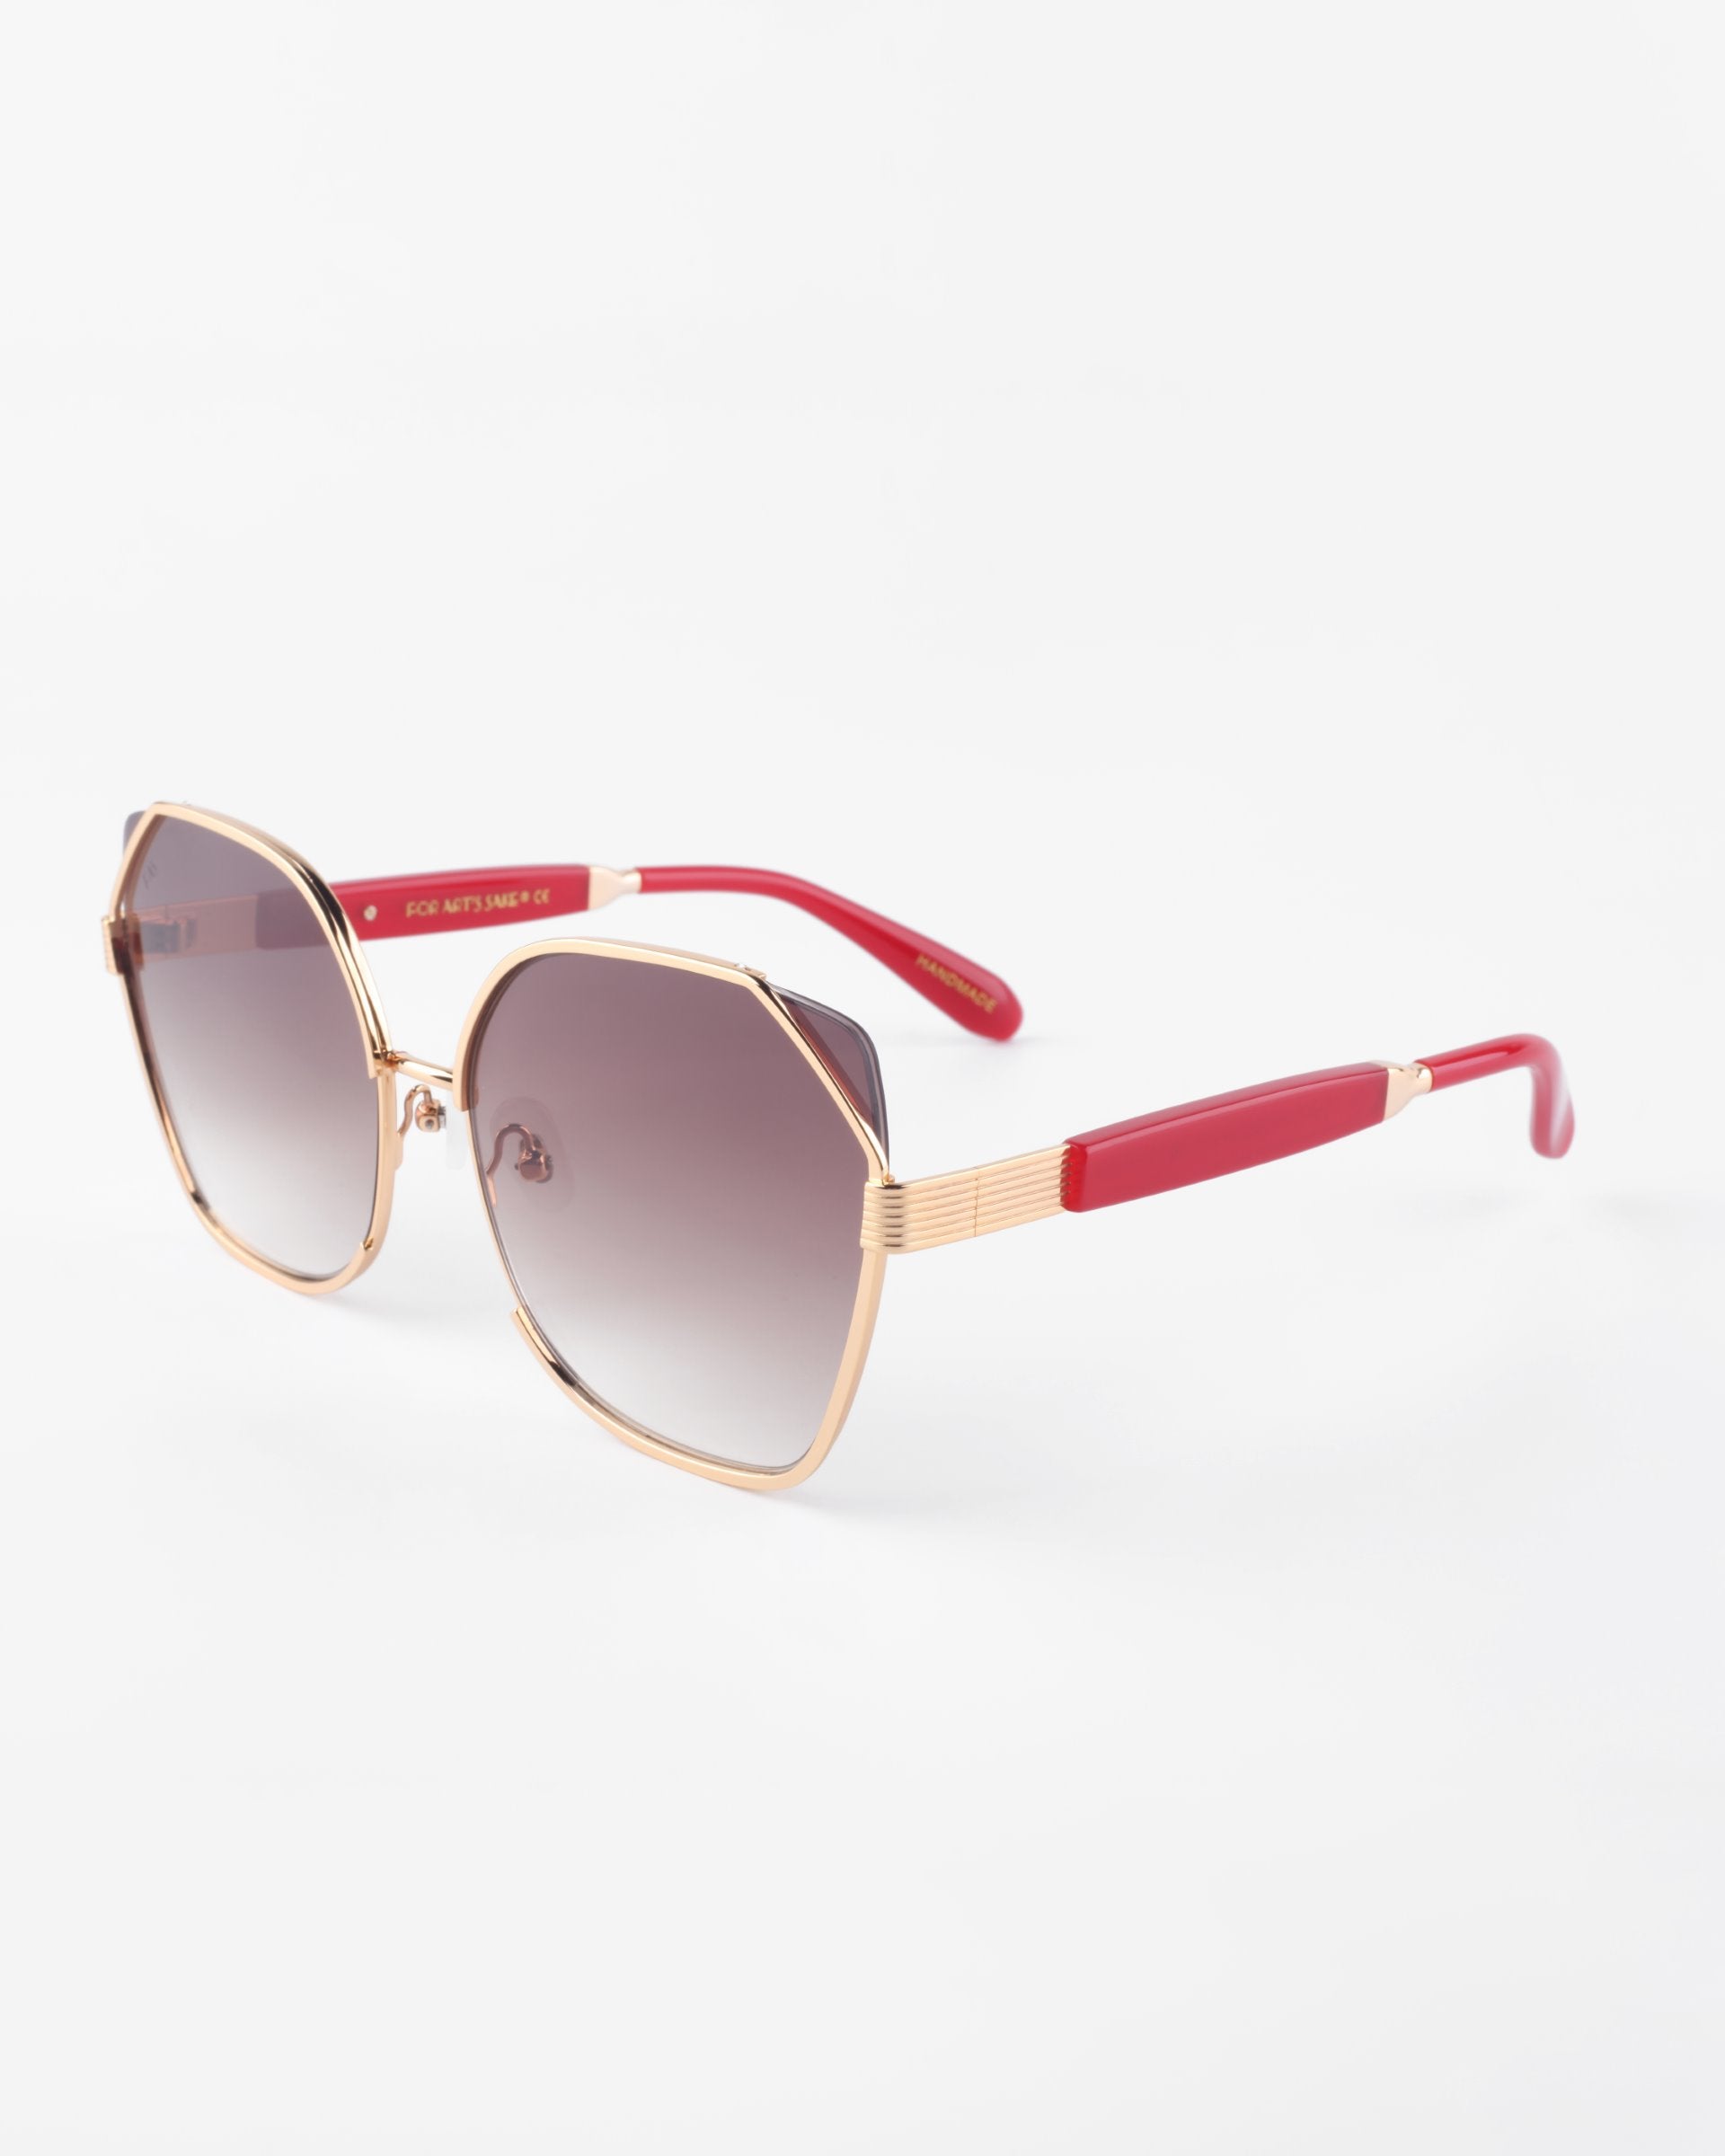 A pair of stylish Montage sunglasses by For Art's Sake® with a gold-plated stainless steel frame and hexagonal lenses, featuring red arms with gold accents. The ultra-lightweight nylon lenses are tinted in a gradient from dark to light, providing a sleek and modern look while offering 100% UVA & UVB protection. The background is plain white.